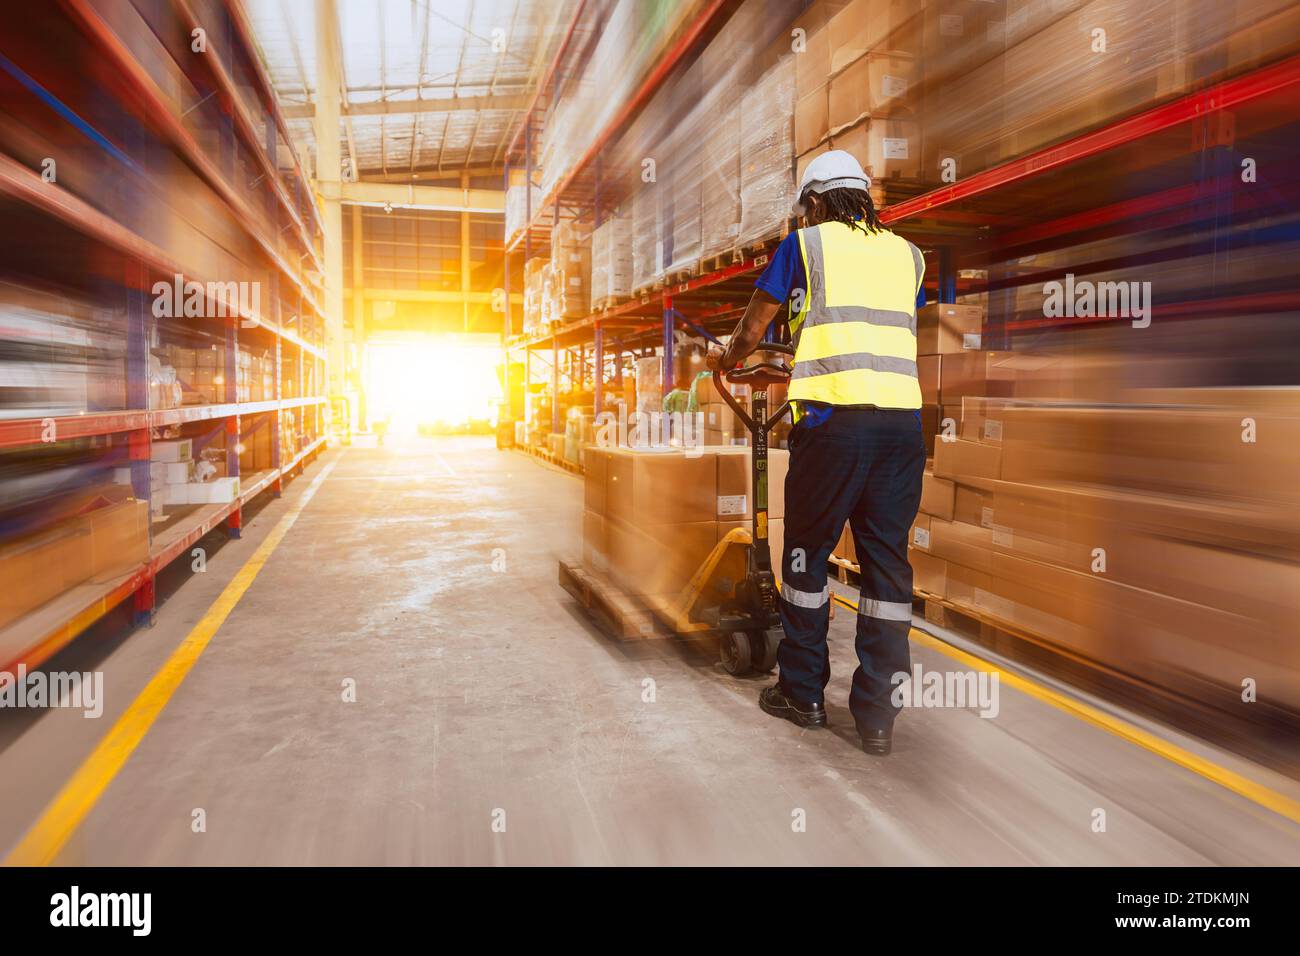 Fast speed quick parcel high performance delivery. Speedy products logistics shipping from cargo warehouse. goods supply chain management industry bus Stock Photo